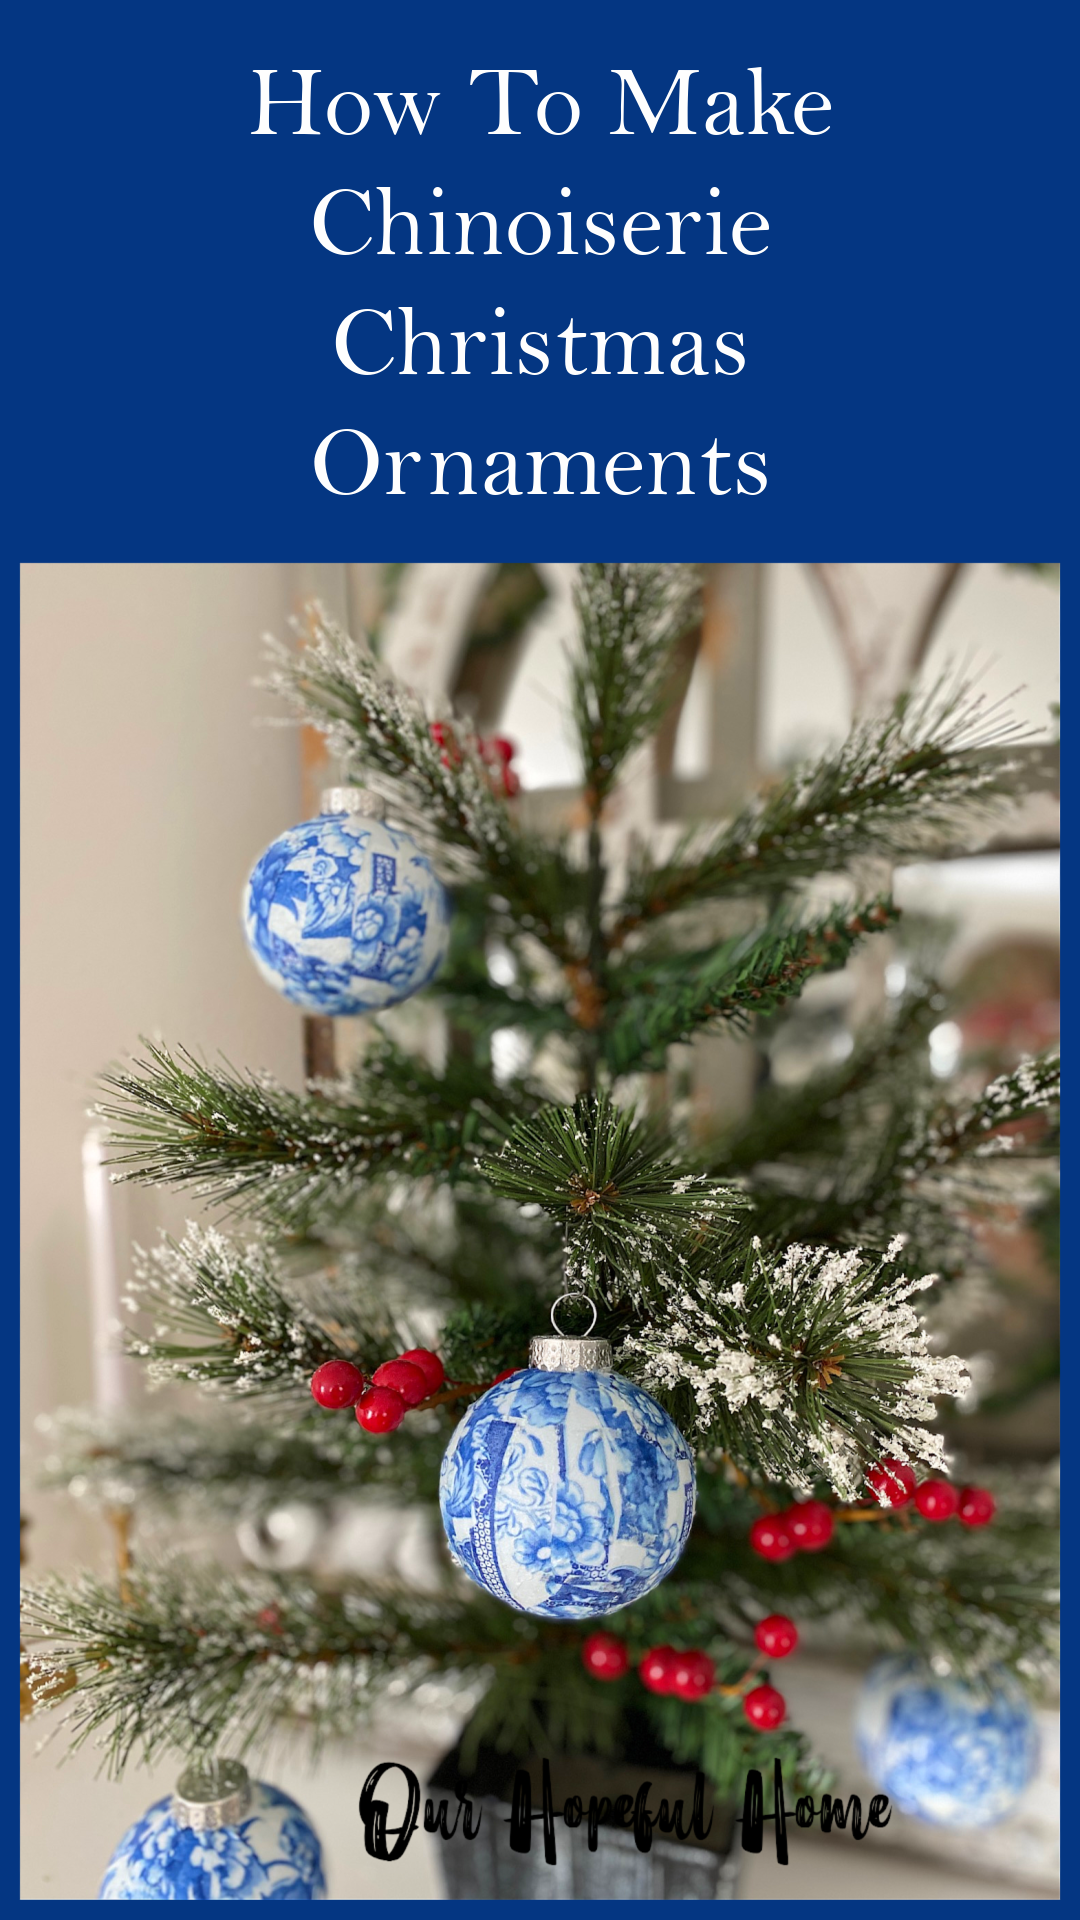 Our Hopeful Home: How To Make Chinoiserie Christmas Ornaments